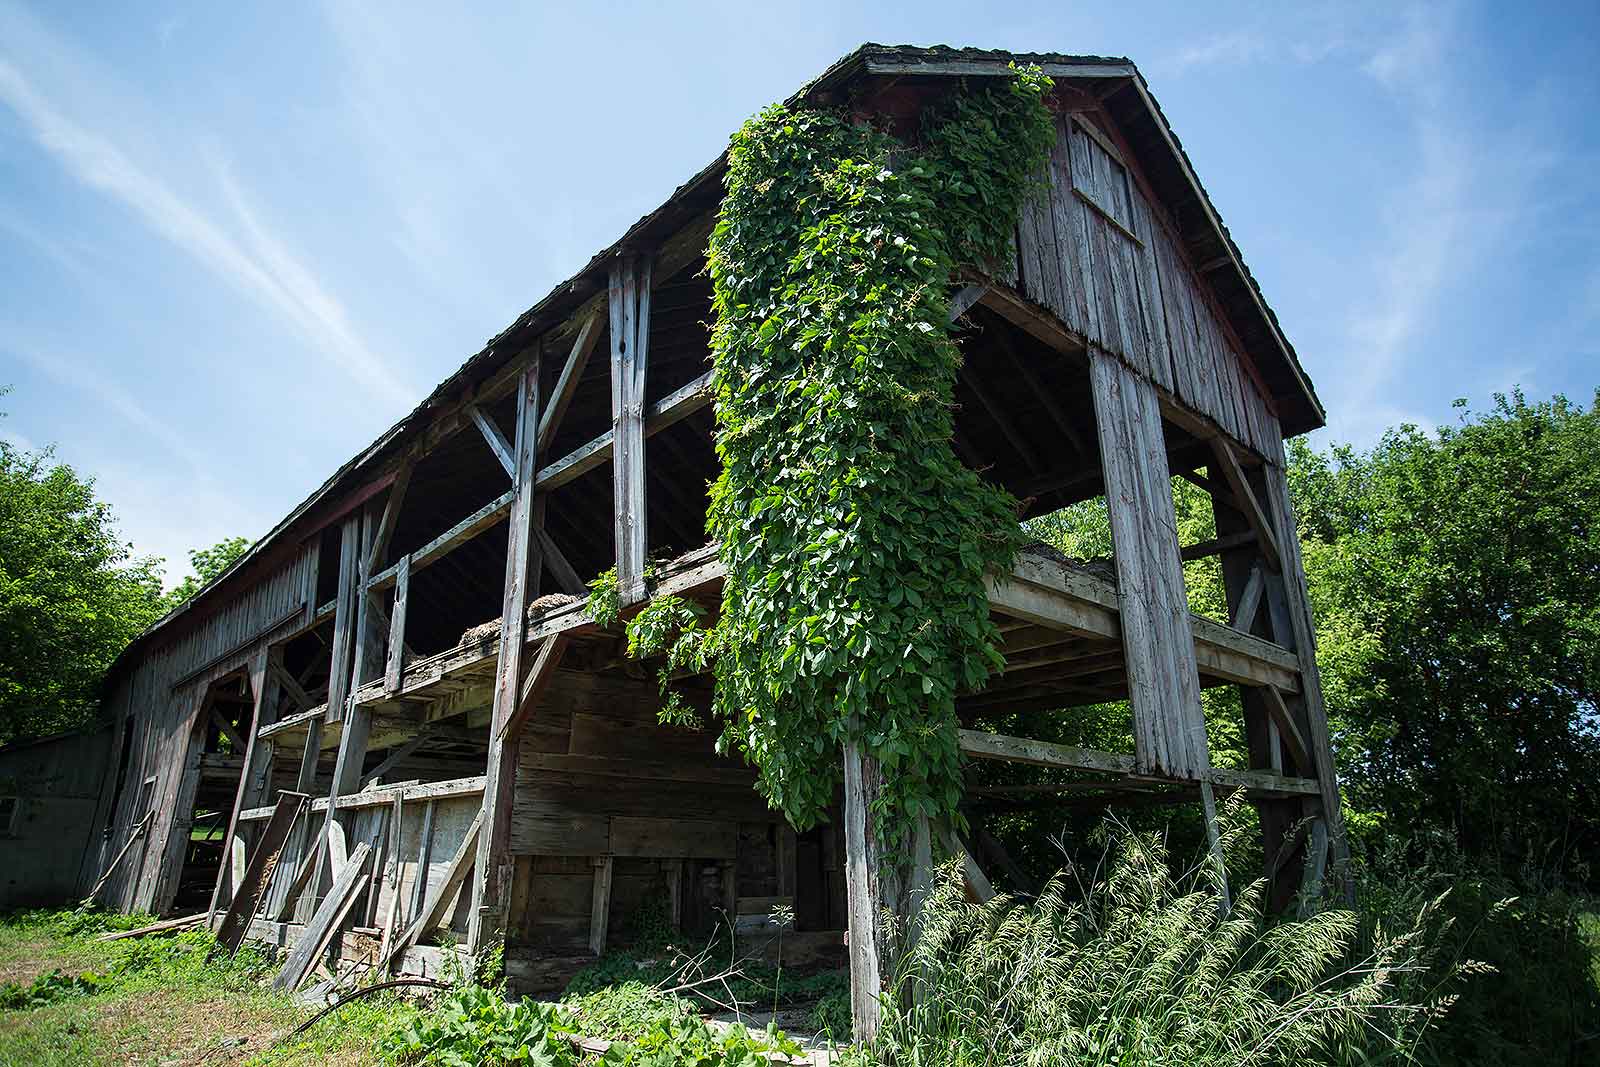  Over time, these wood barns were subjected to extreme temperatures, wind and rain. 